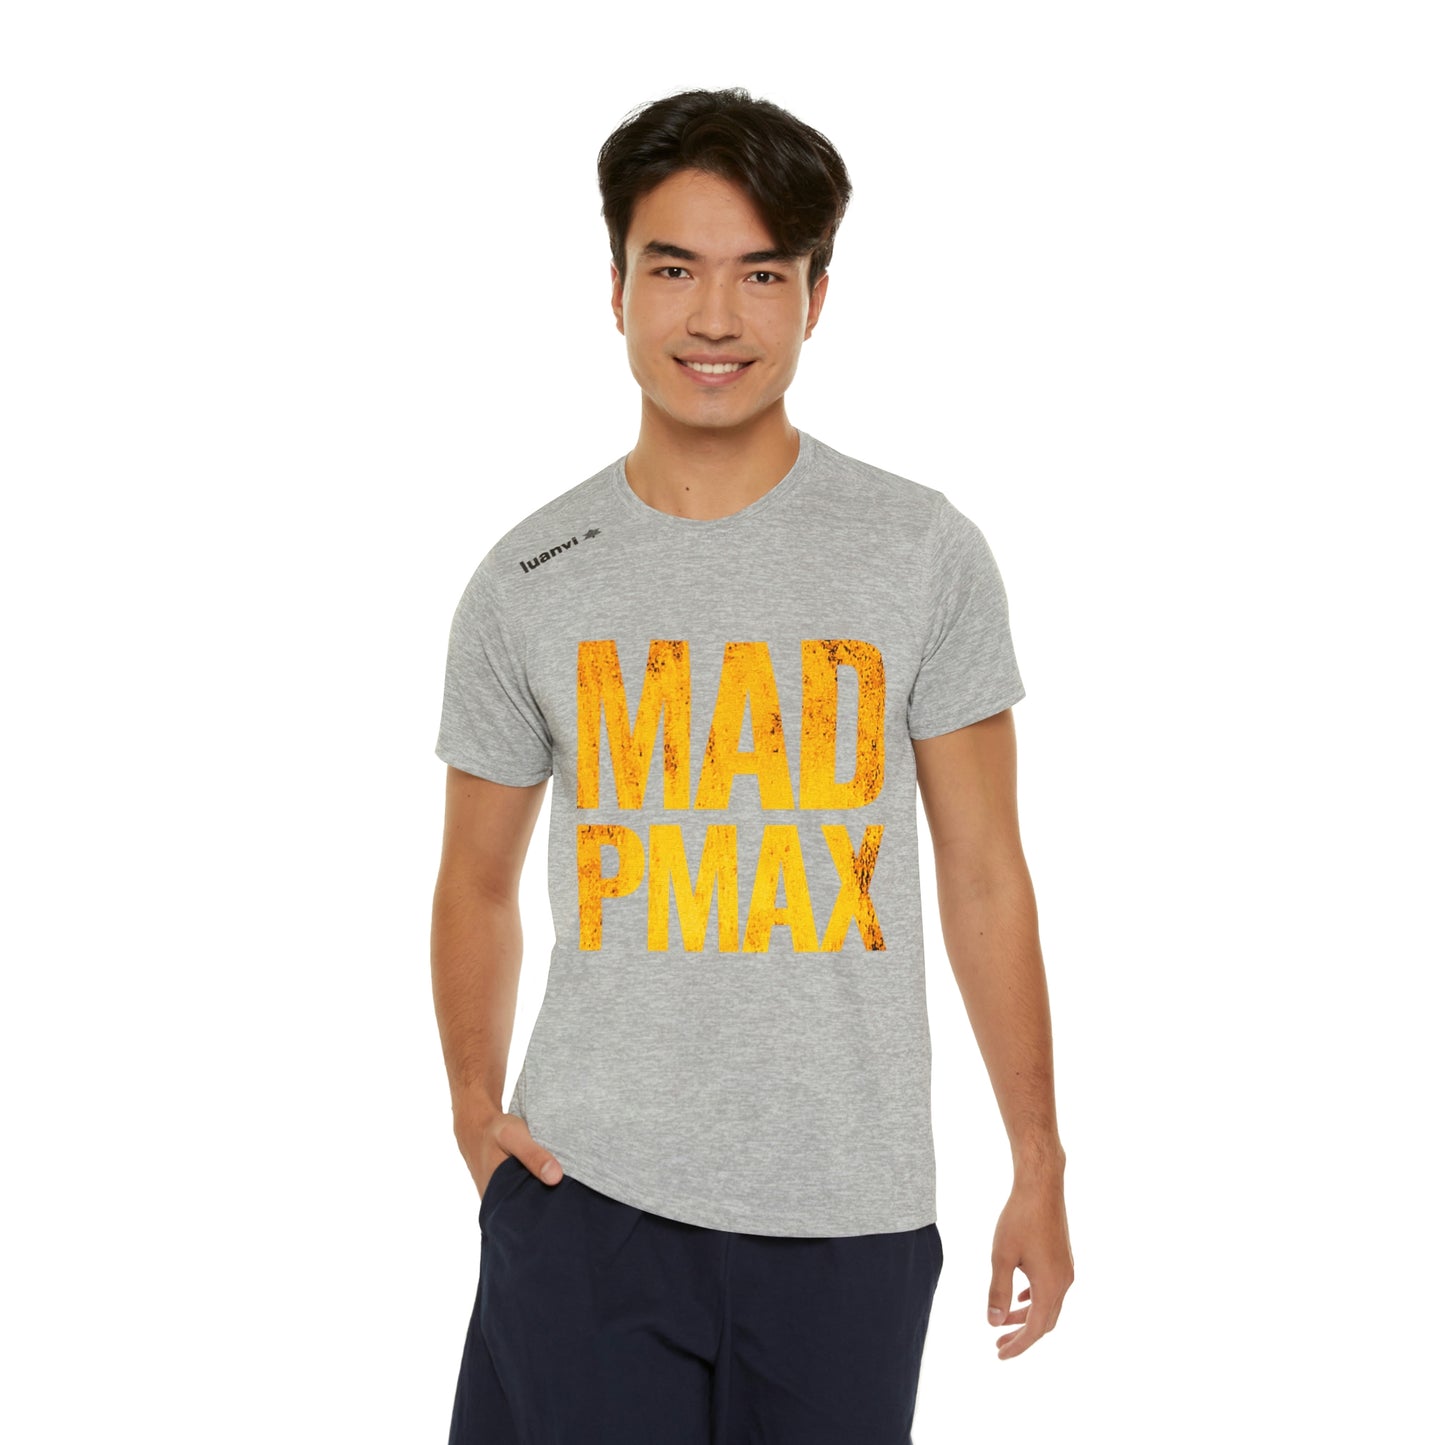 Mad Pmax - Google Ads PPC Sports T-shirt for Men